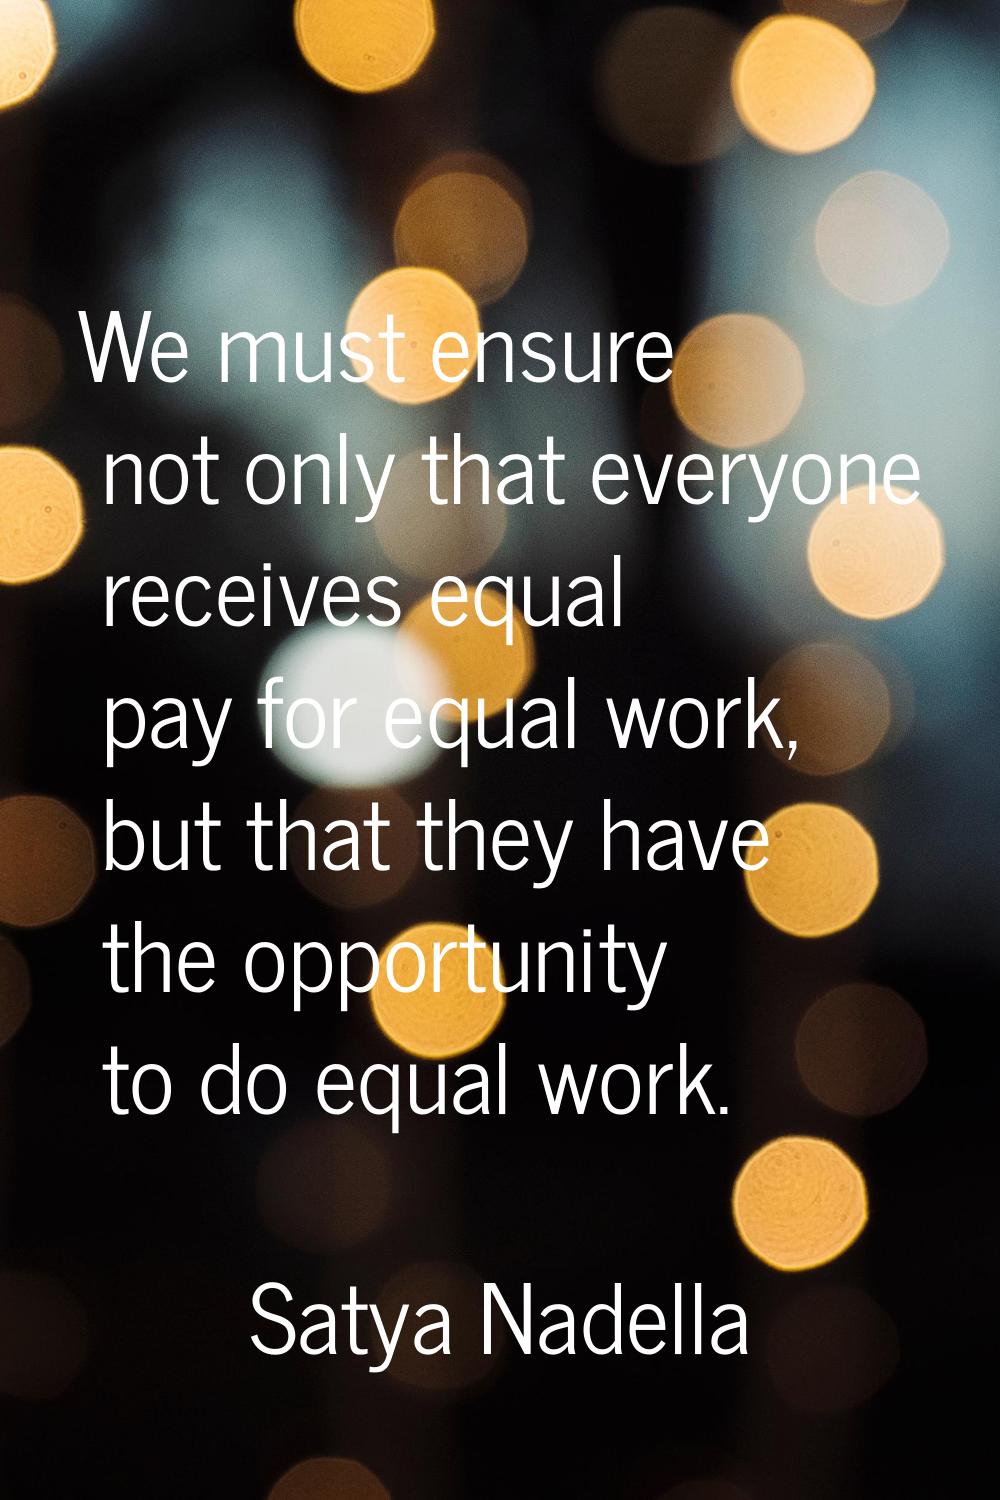 We must ensure not only that everyone receives equal pay for equal work, but that they have the opp